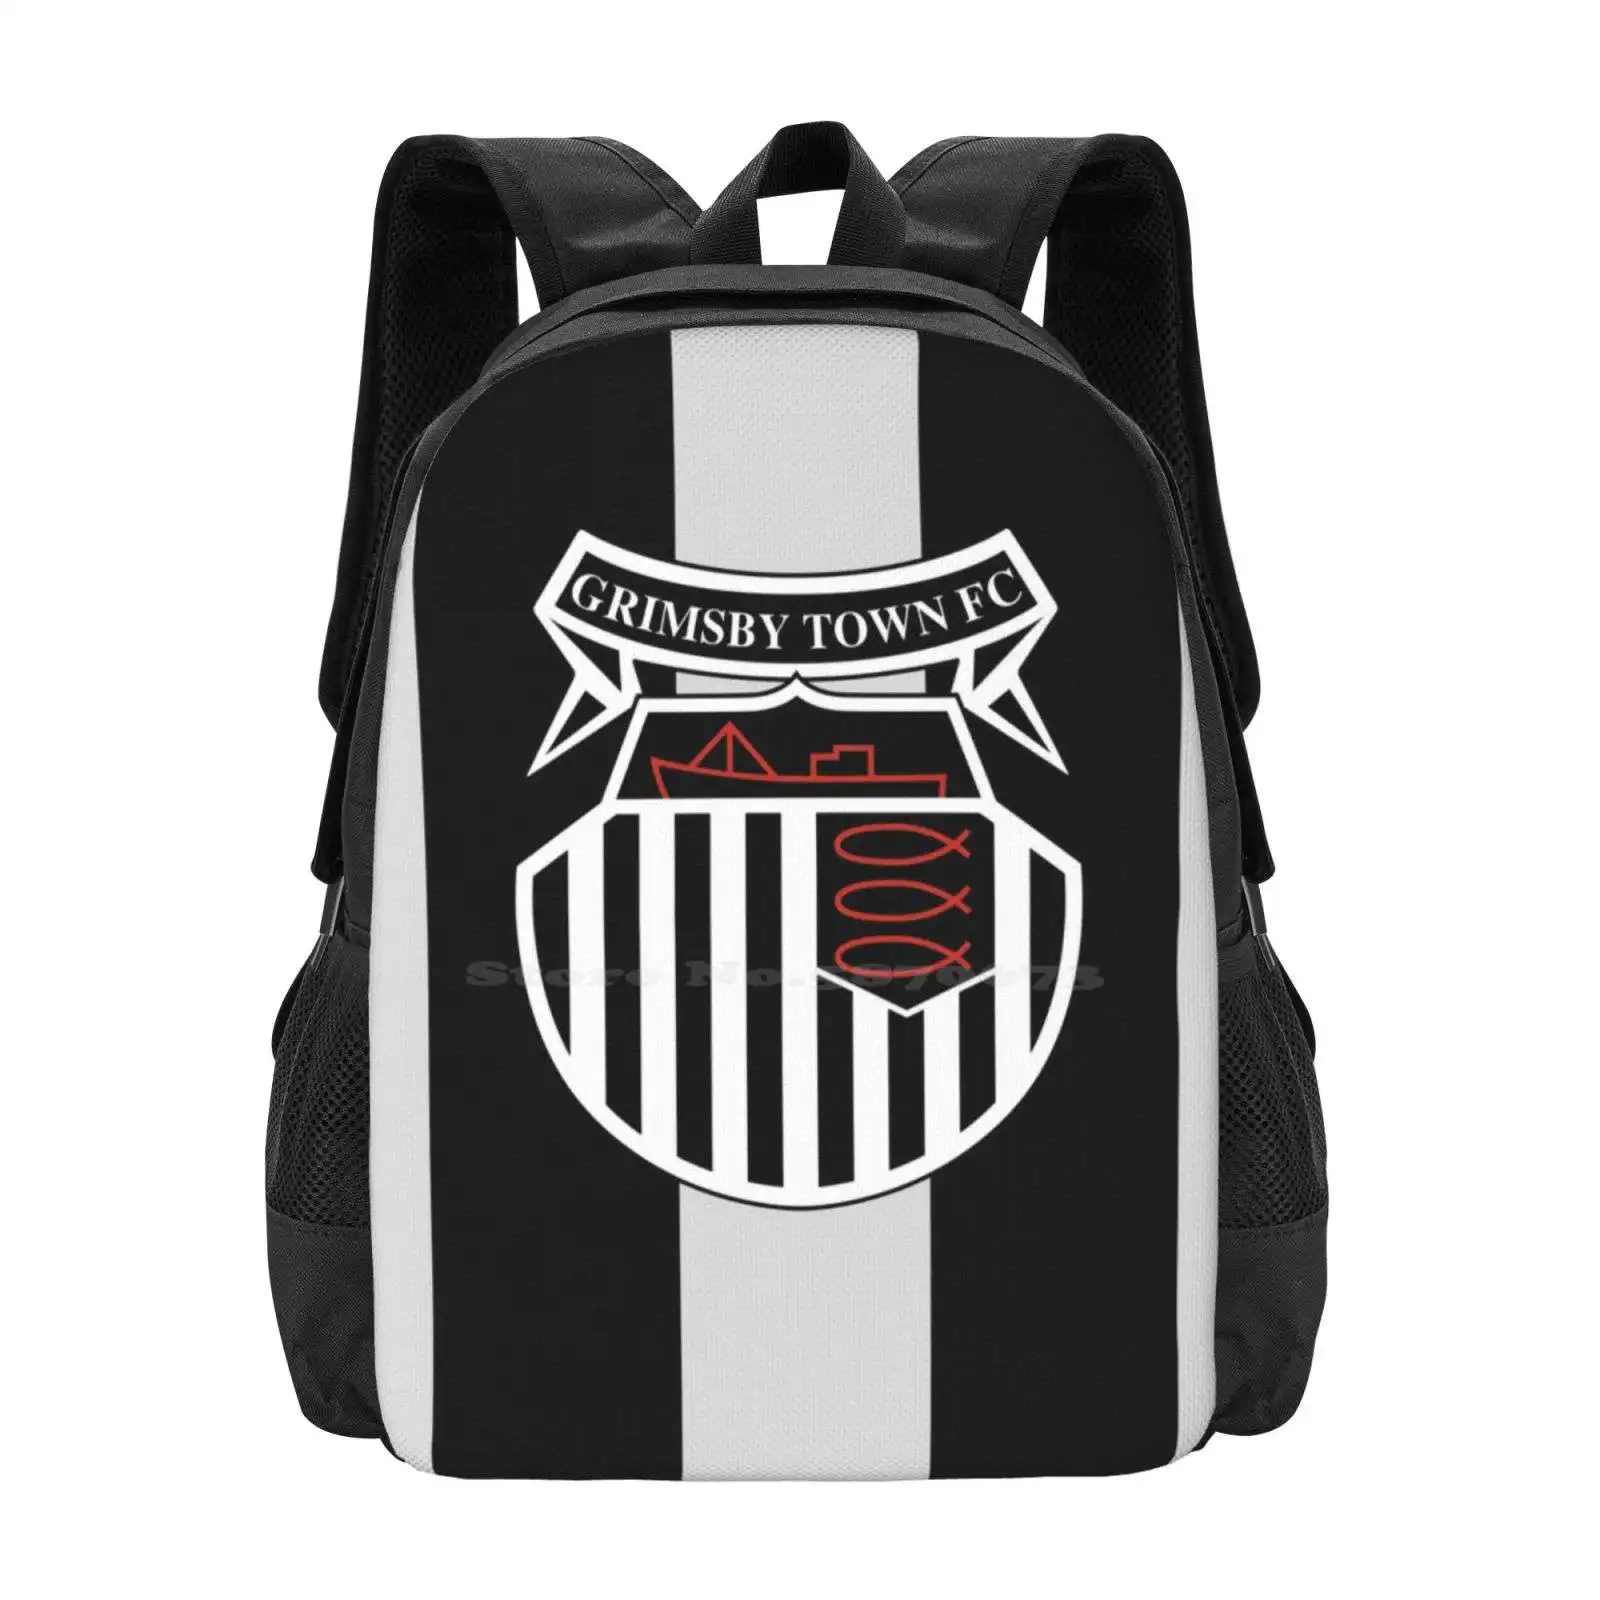 

Grimsby Town Fc Pattern Design Bag Student'S Backpack Grimsby Town Afc Football Club English England Orange Red Two League Efl